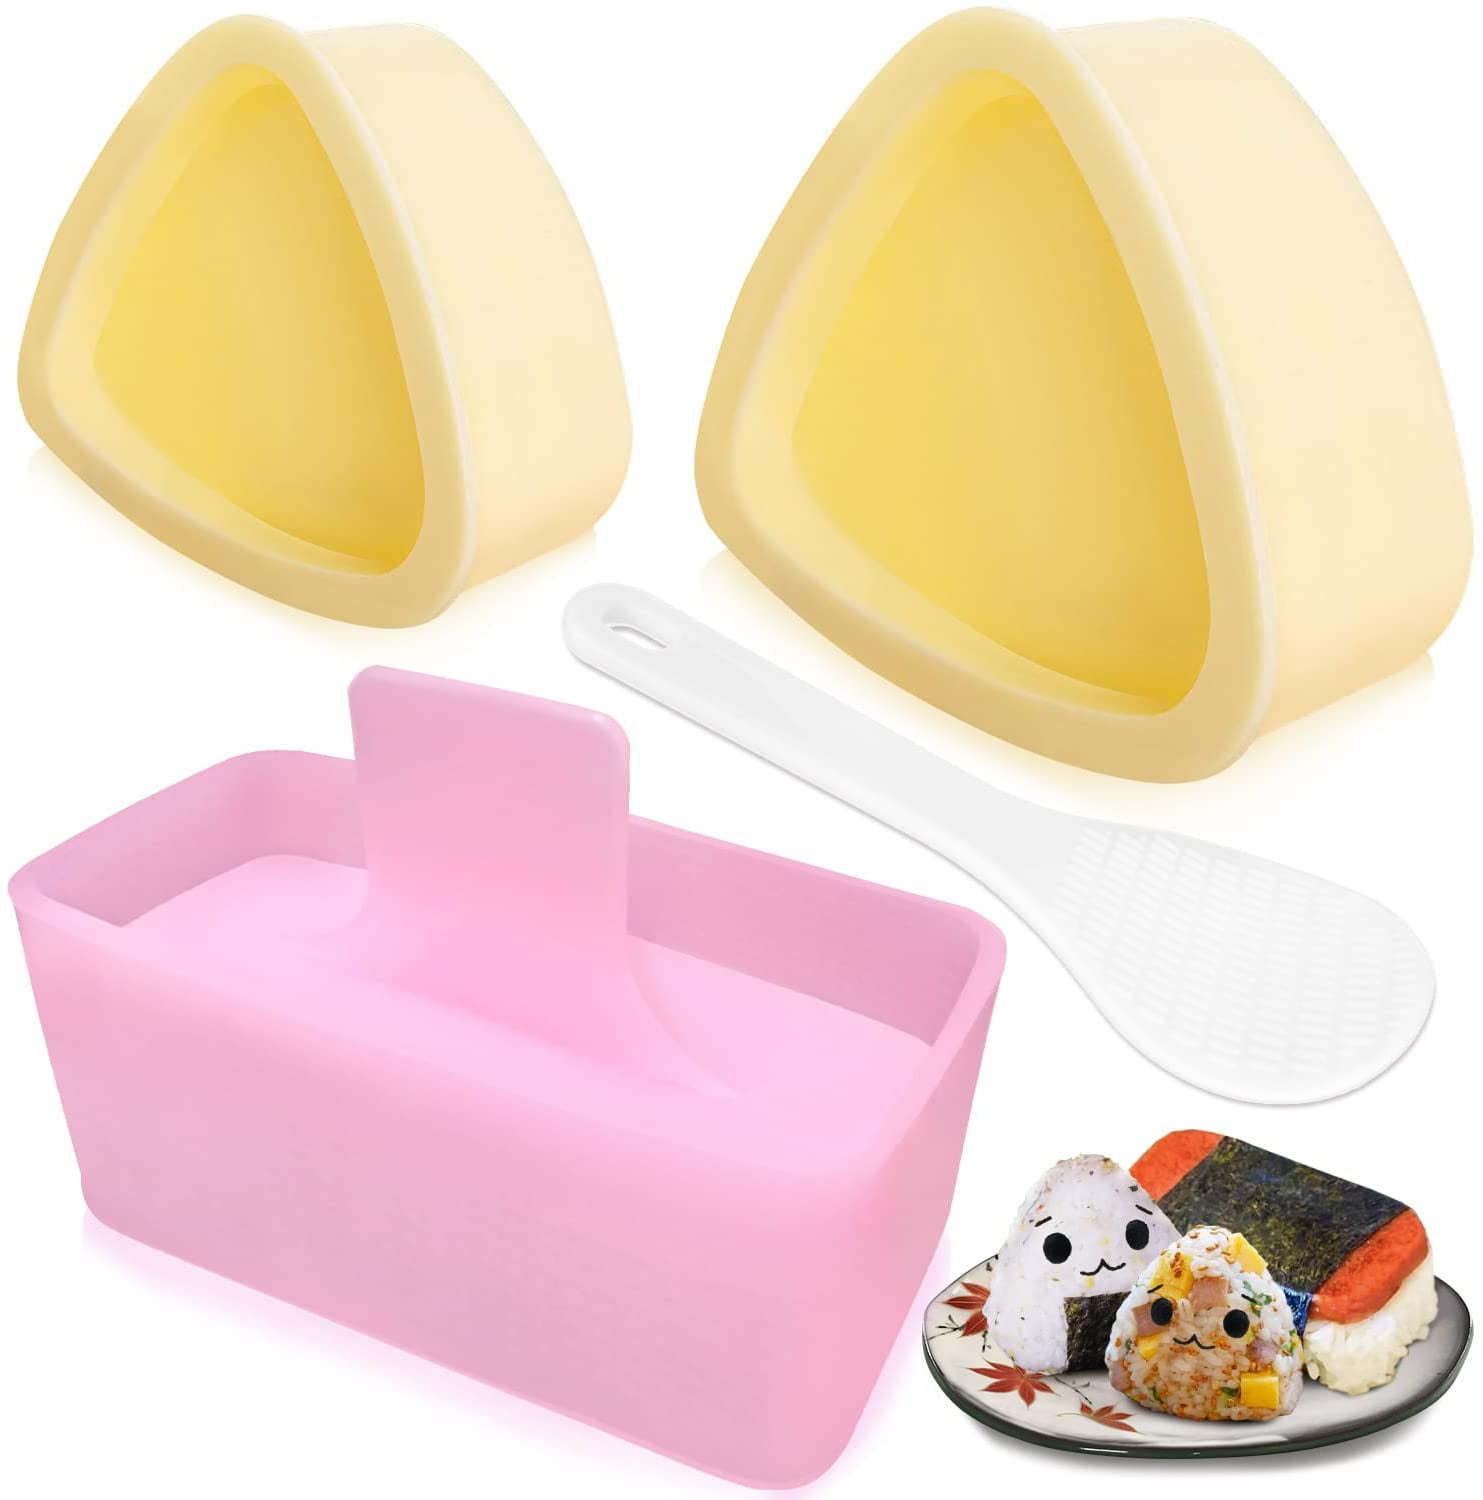 Spam Musubi Mold Rice Ball Maker Onigiri Kit - 7 Pcs Onigiri Mold Set with  Luncheon Meat Cheese Egg Butter Cutter Slicer and Rice Paddle - Easy To Use